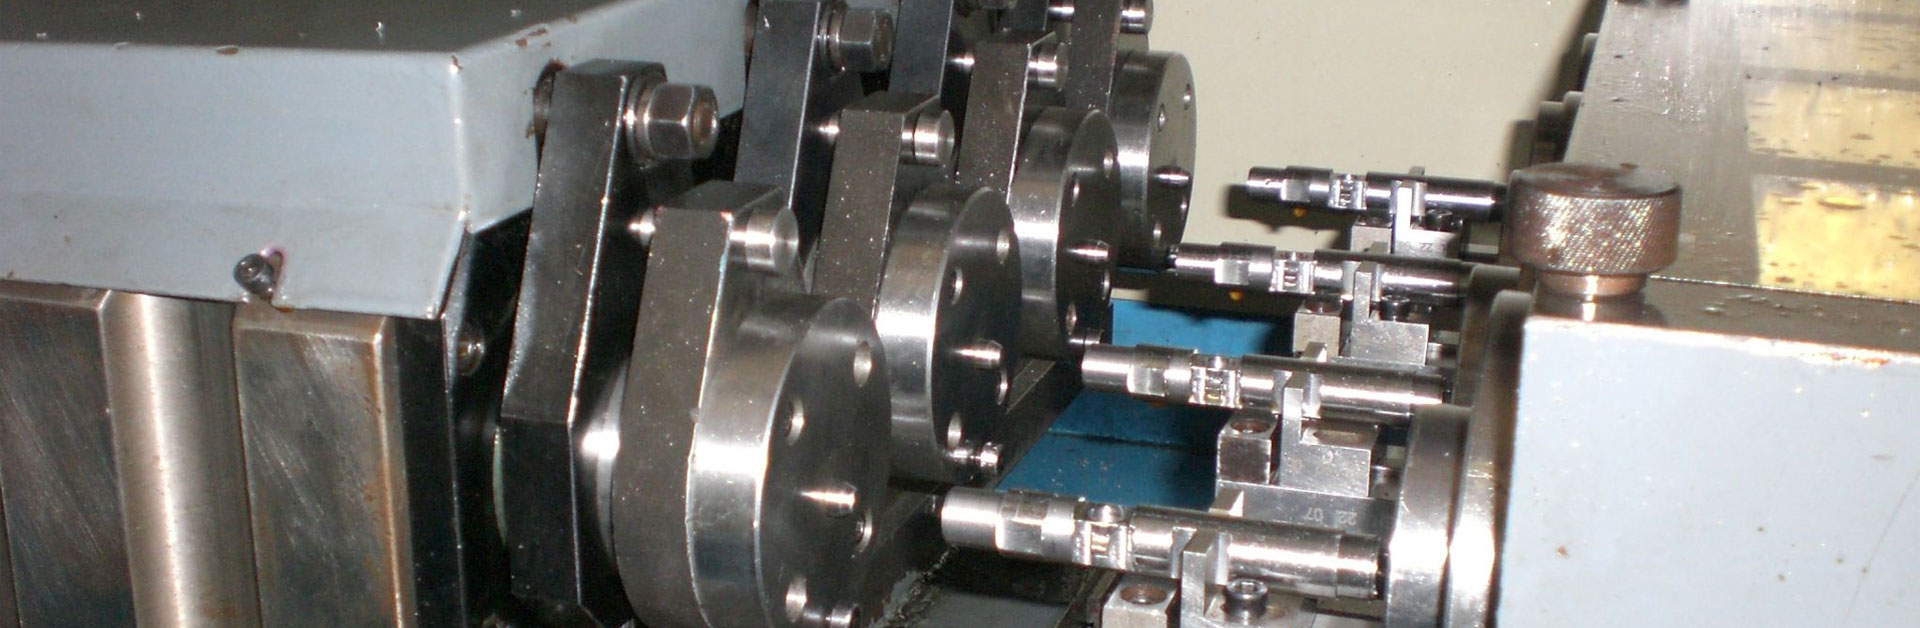 Cnc lathe machining services for metal and plastic parts.